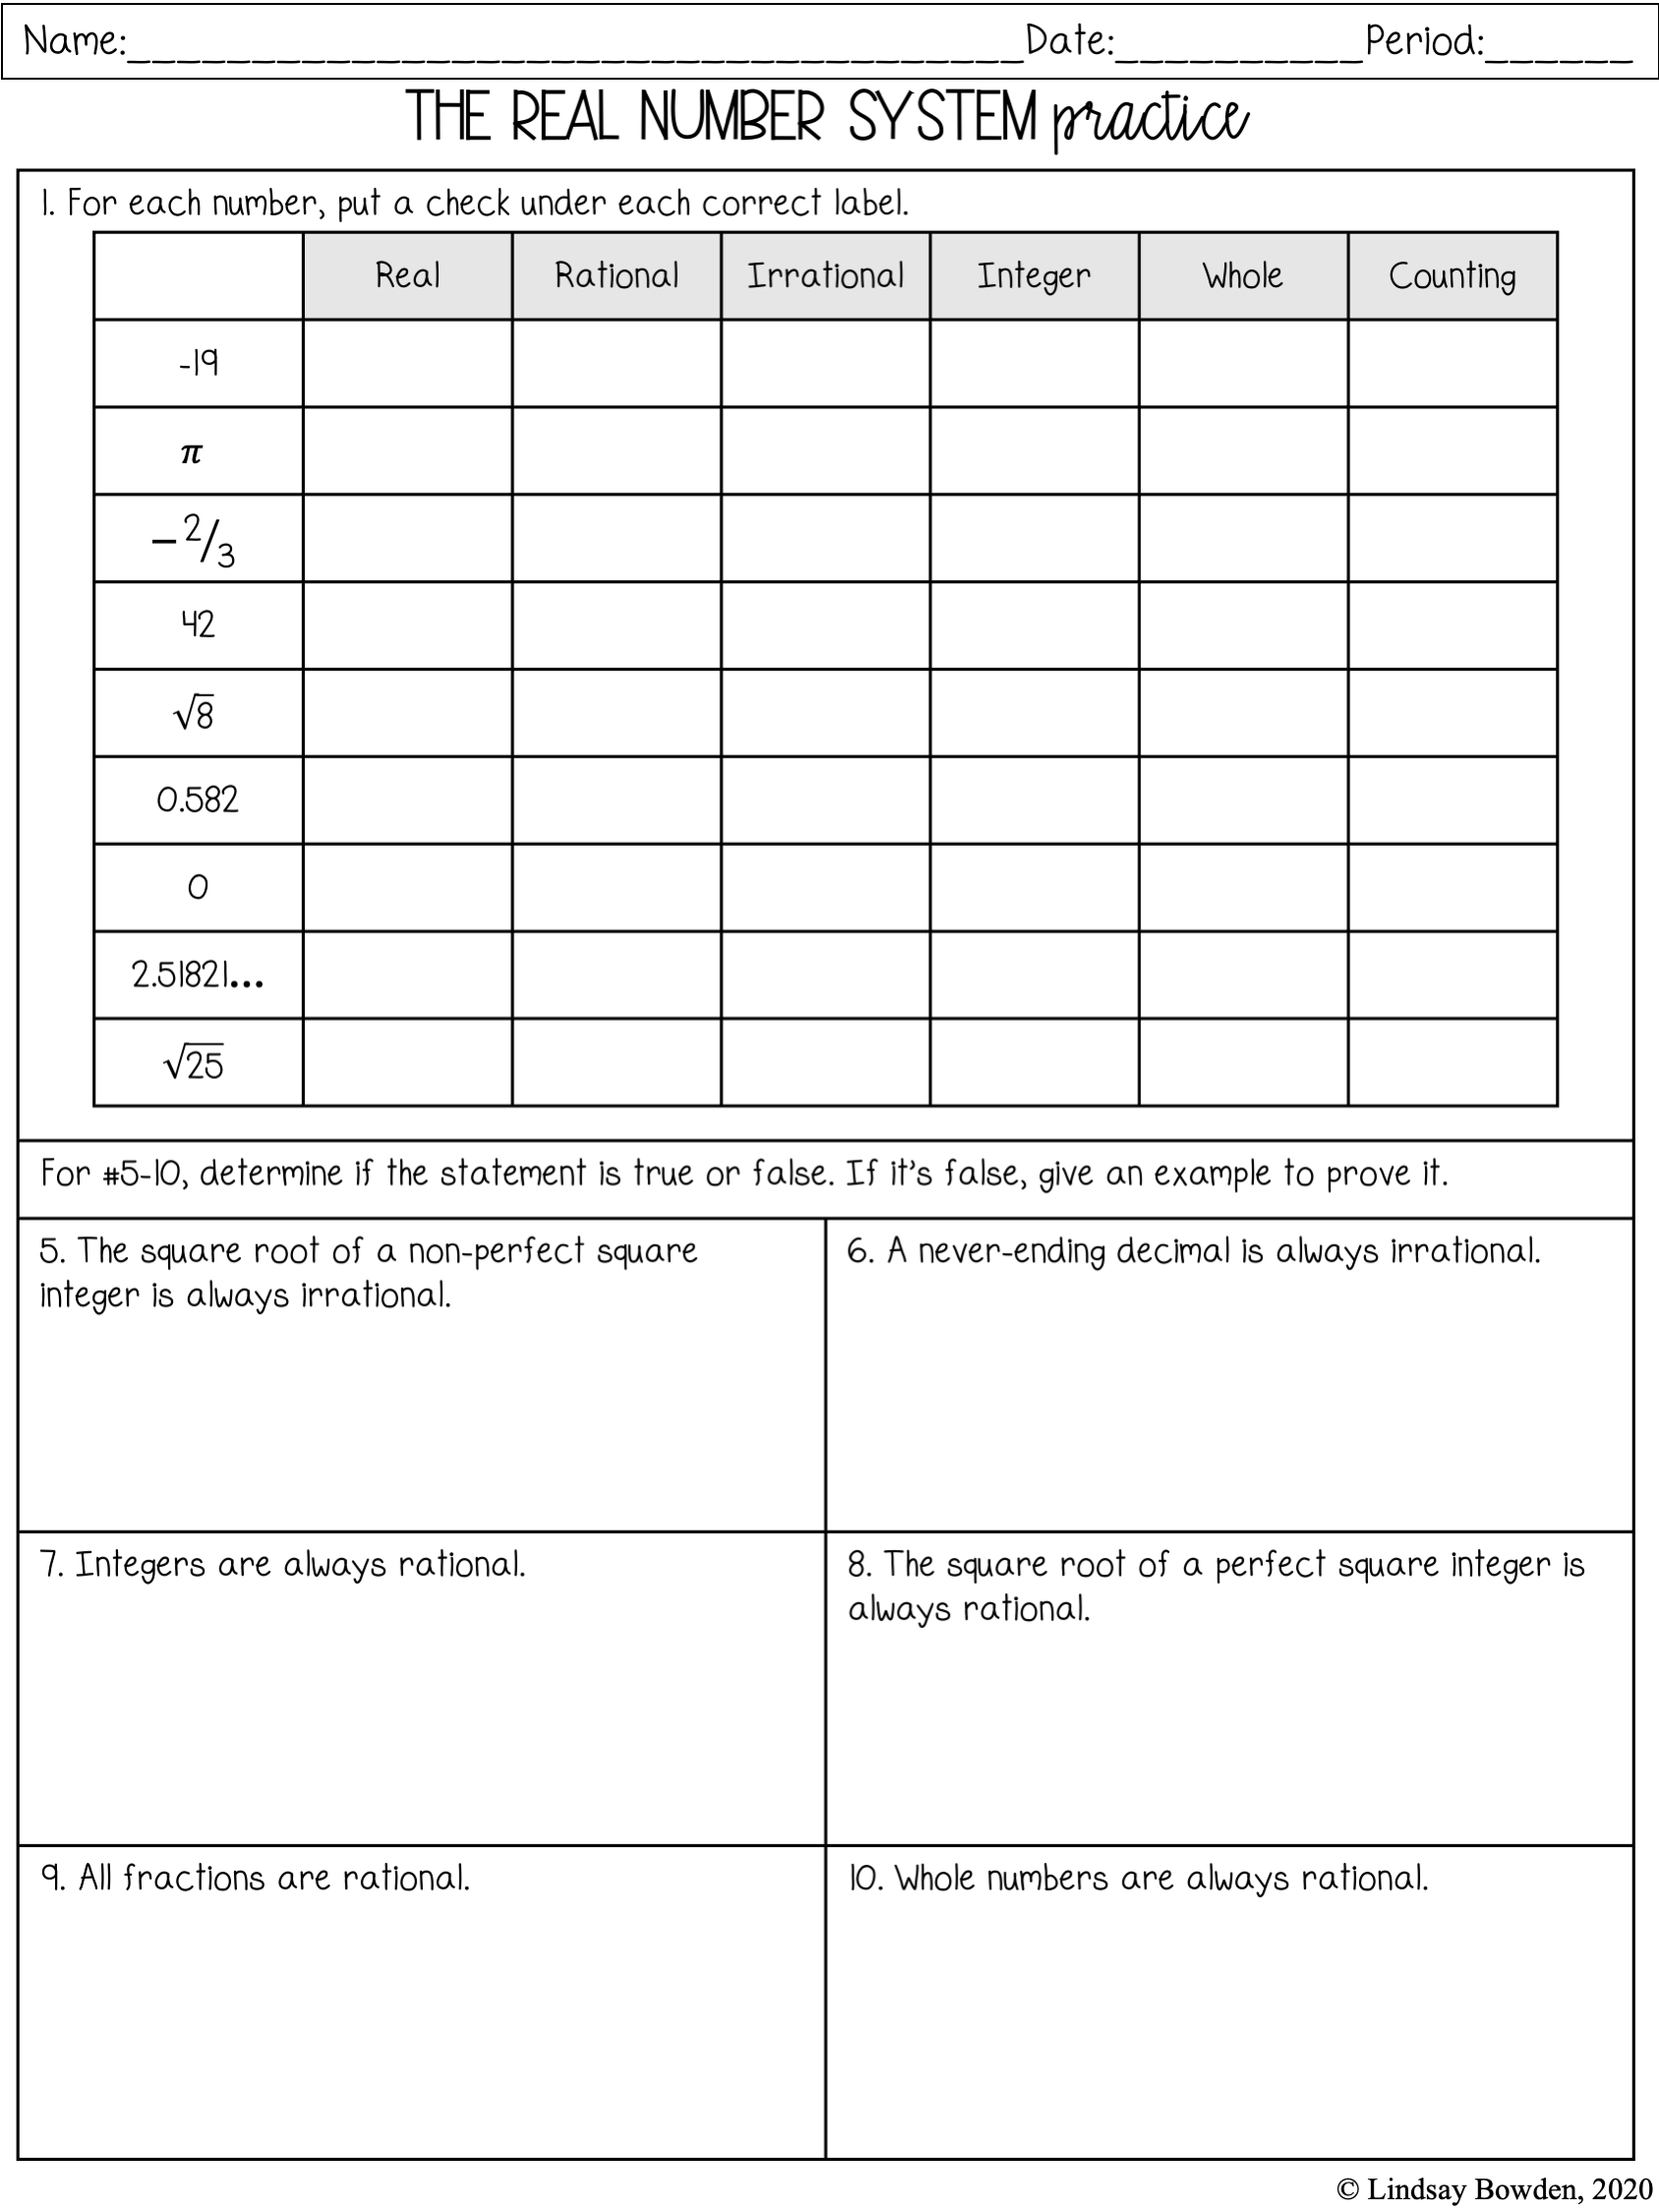 Csi The Real Number System Worksheet Answers